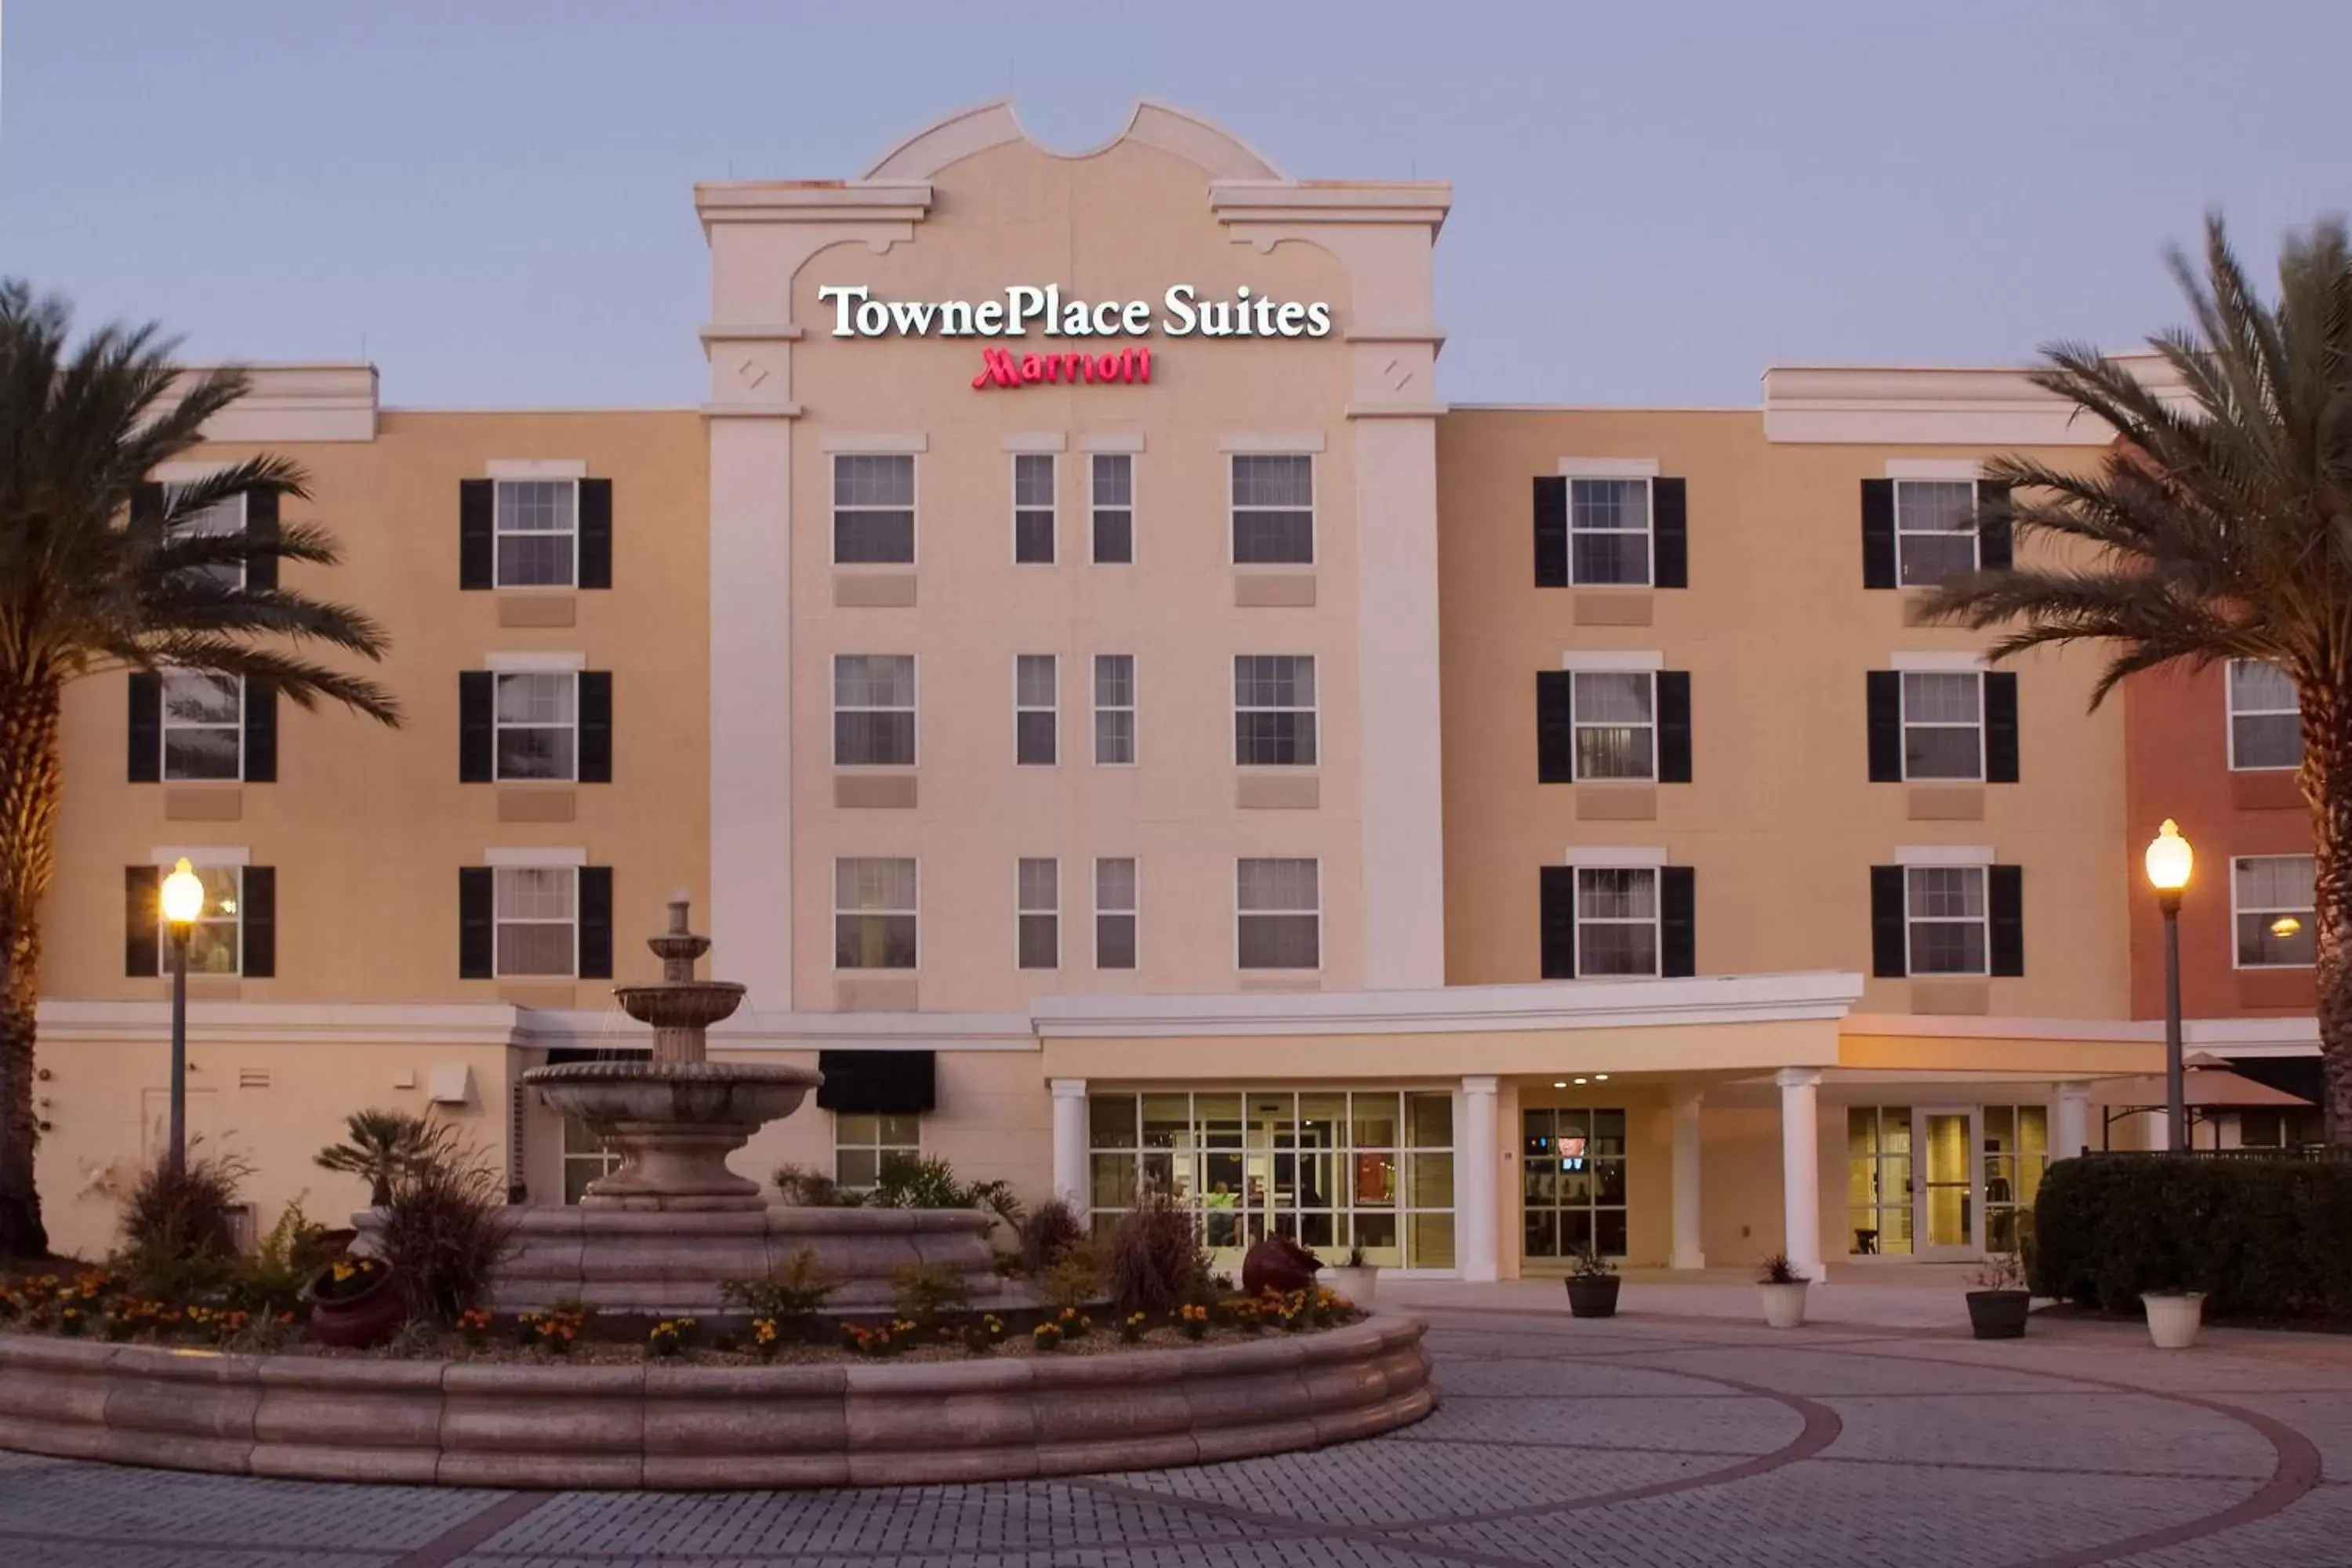 Property Building in TownePlace Suites The Villages